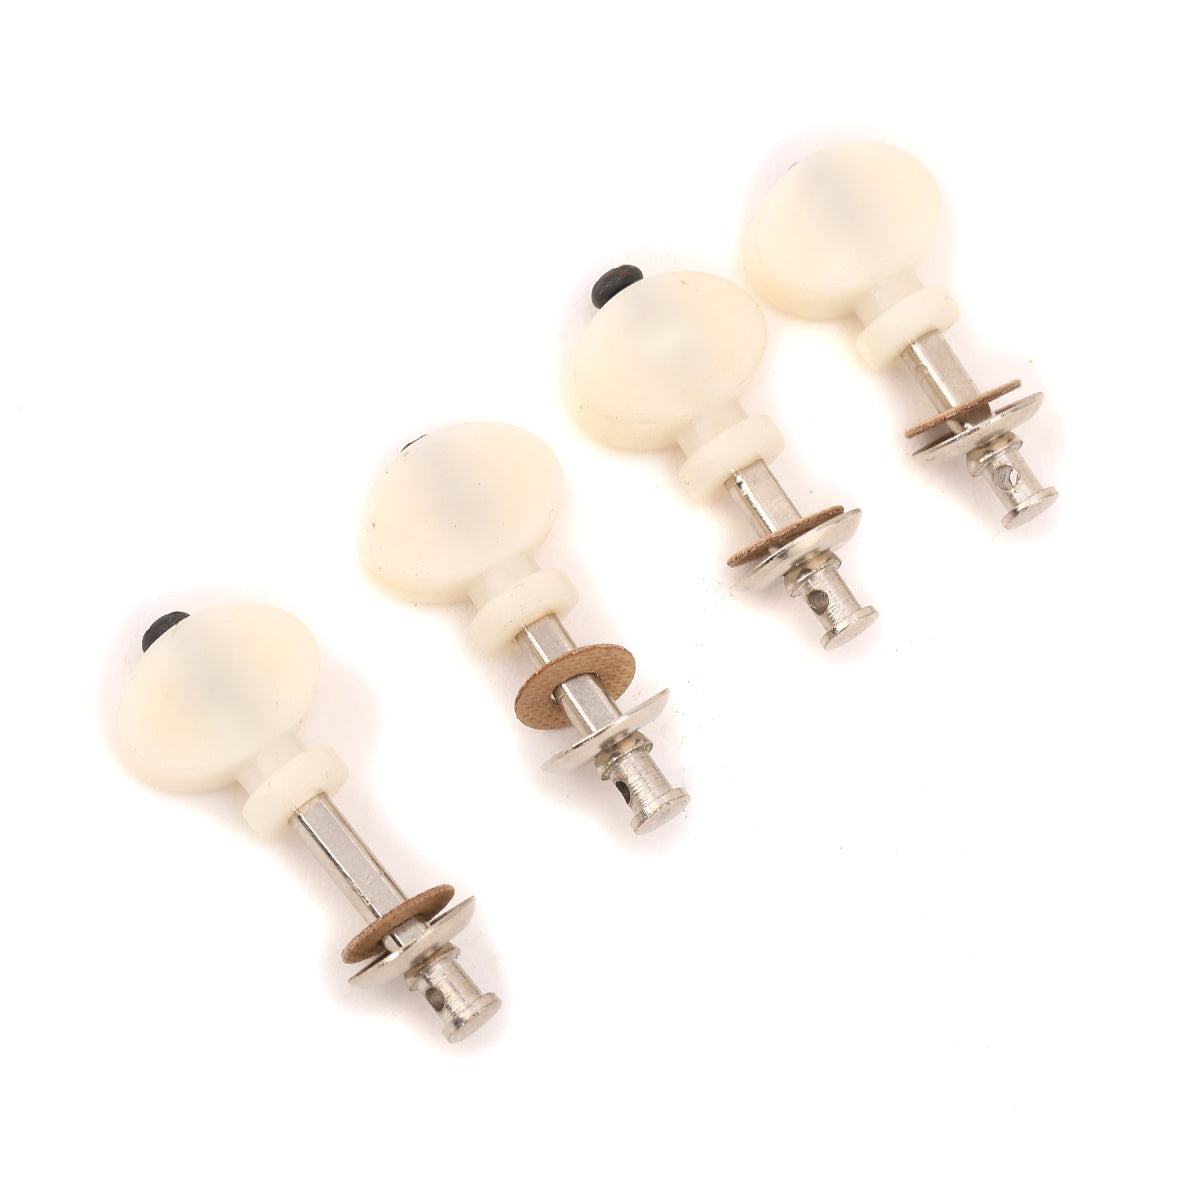 Musiclily Ukulele Tuning Pegs Keys Machine Heads Tuners, Chrome with White Button(Set of 4)